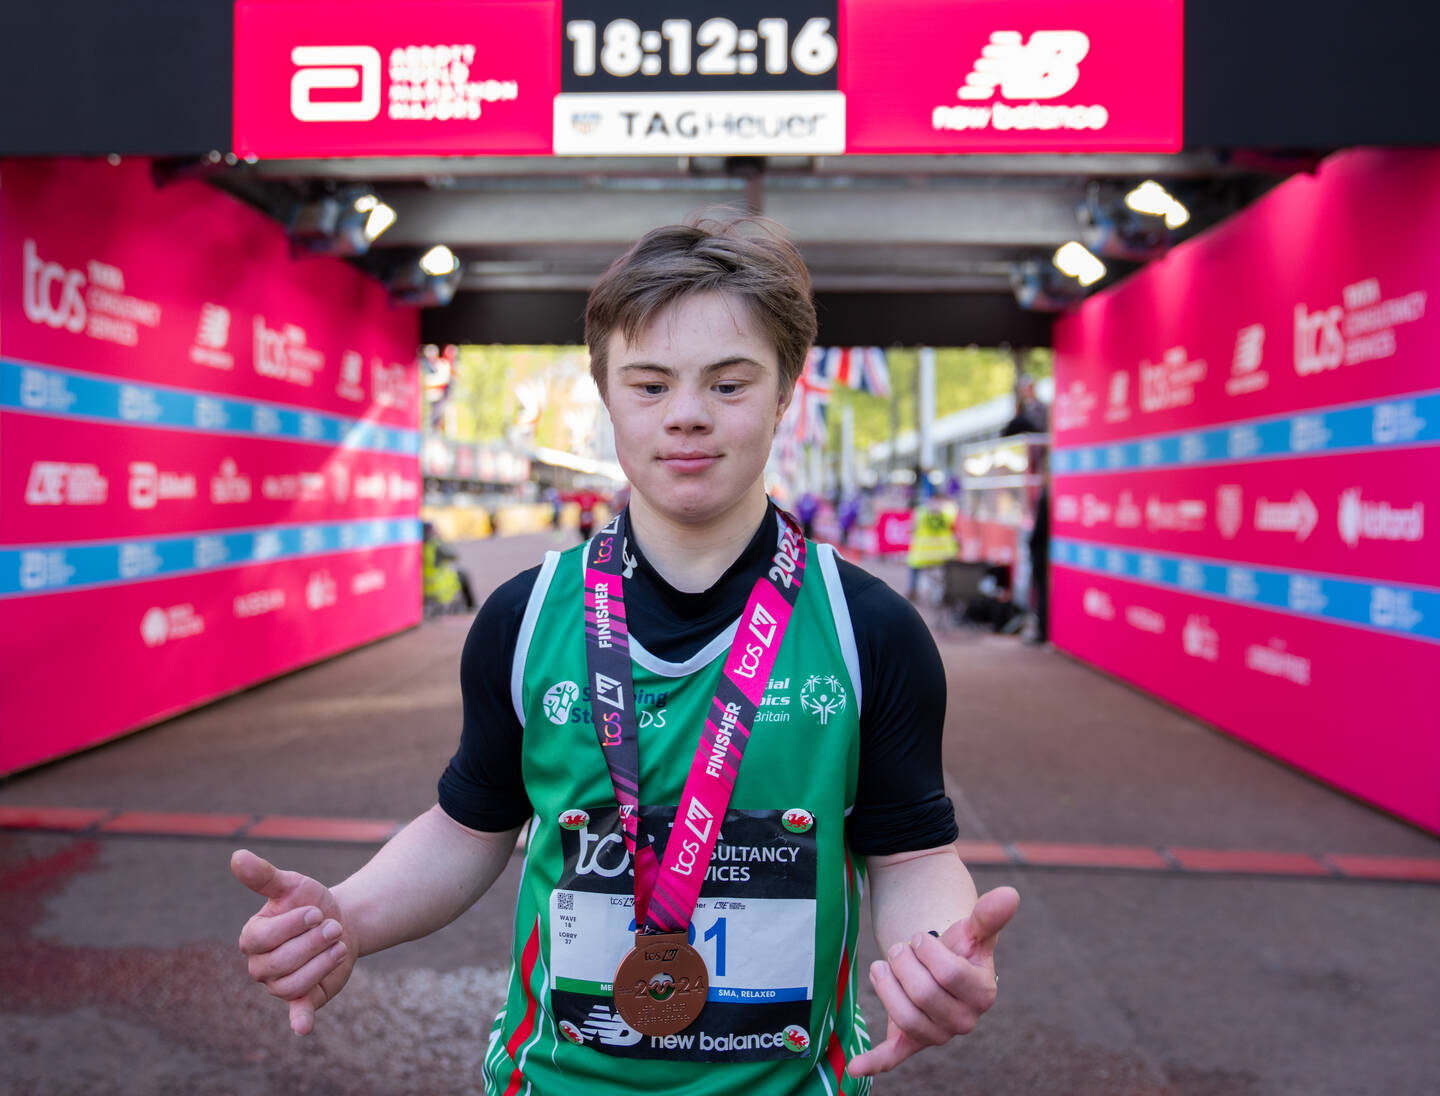 Lloyd Martin, who has downs syndrome, is stood on the finish line of the London Marathon having just completed the race. He is wearing his medal and giving a thumbs up to the camera.